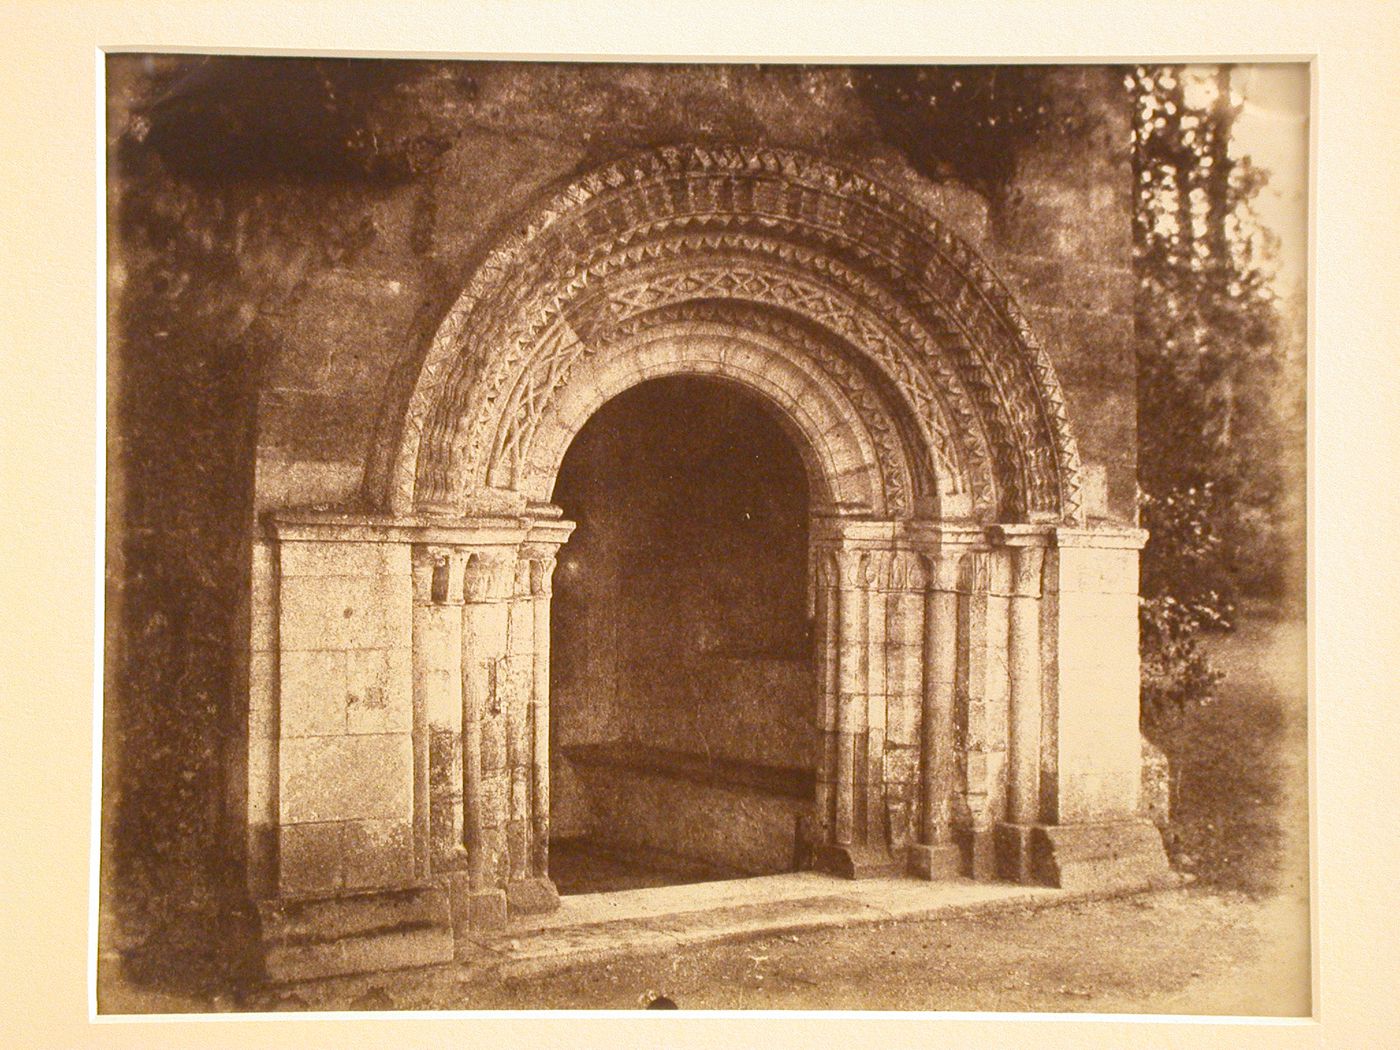 View of carved doorway, church porch, Castle Ashby, Ashby-de-la-Zouch, Leicestershire, England